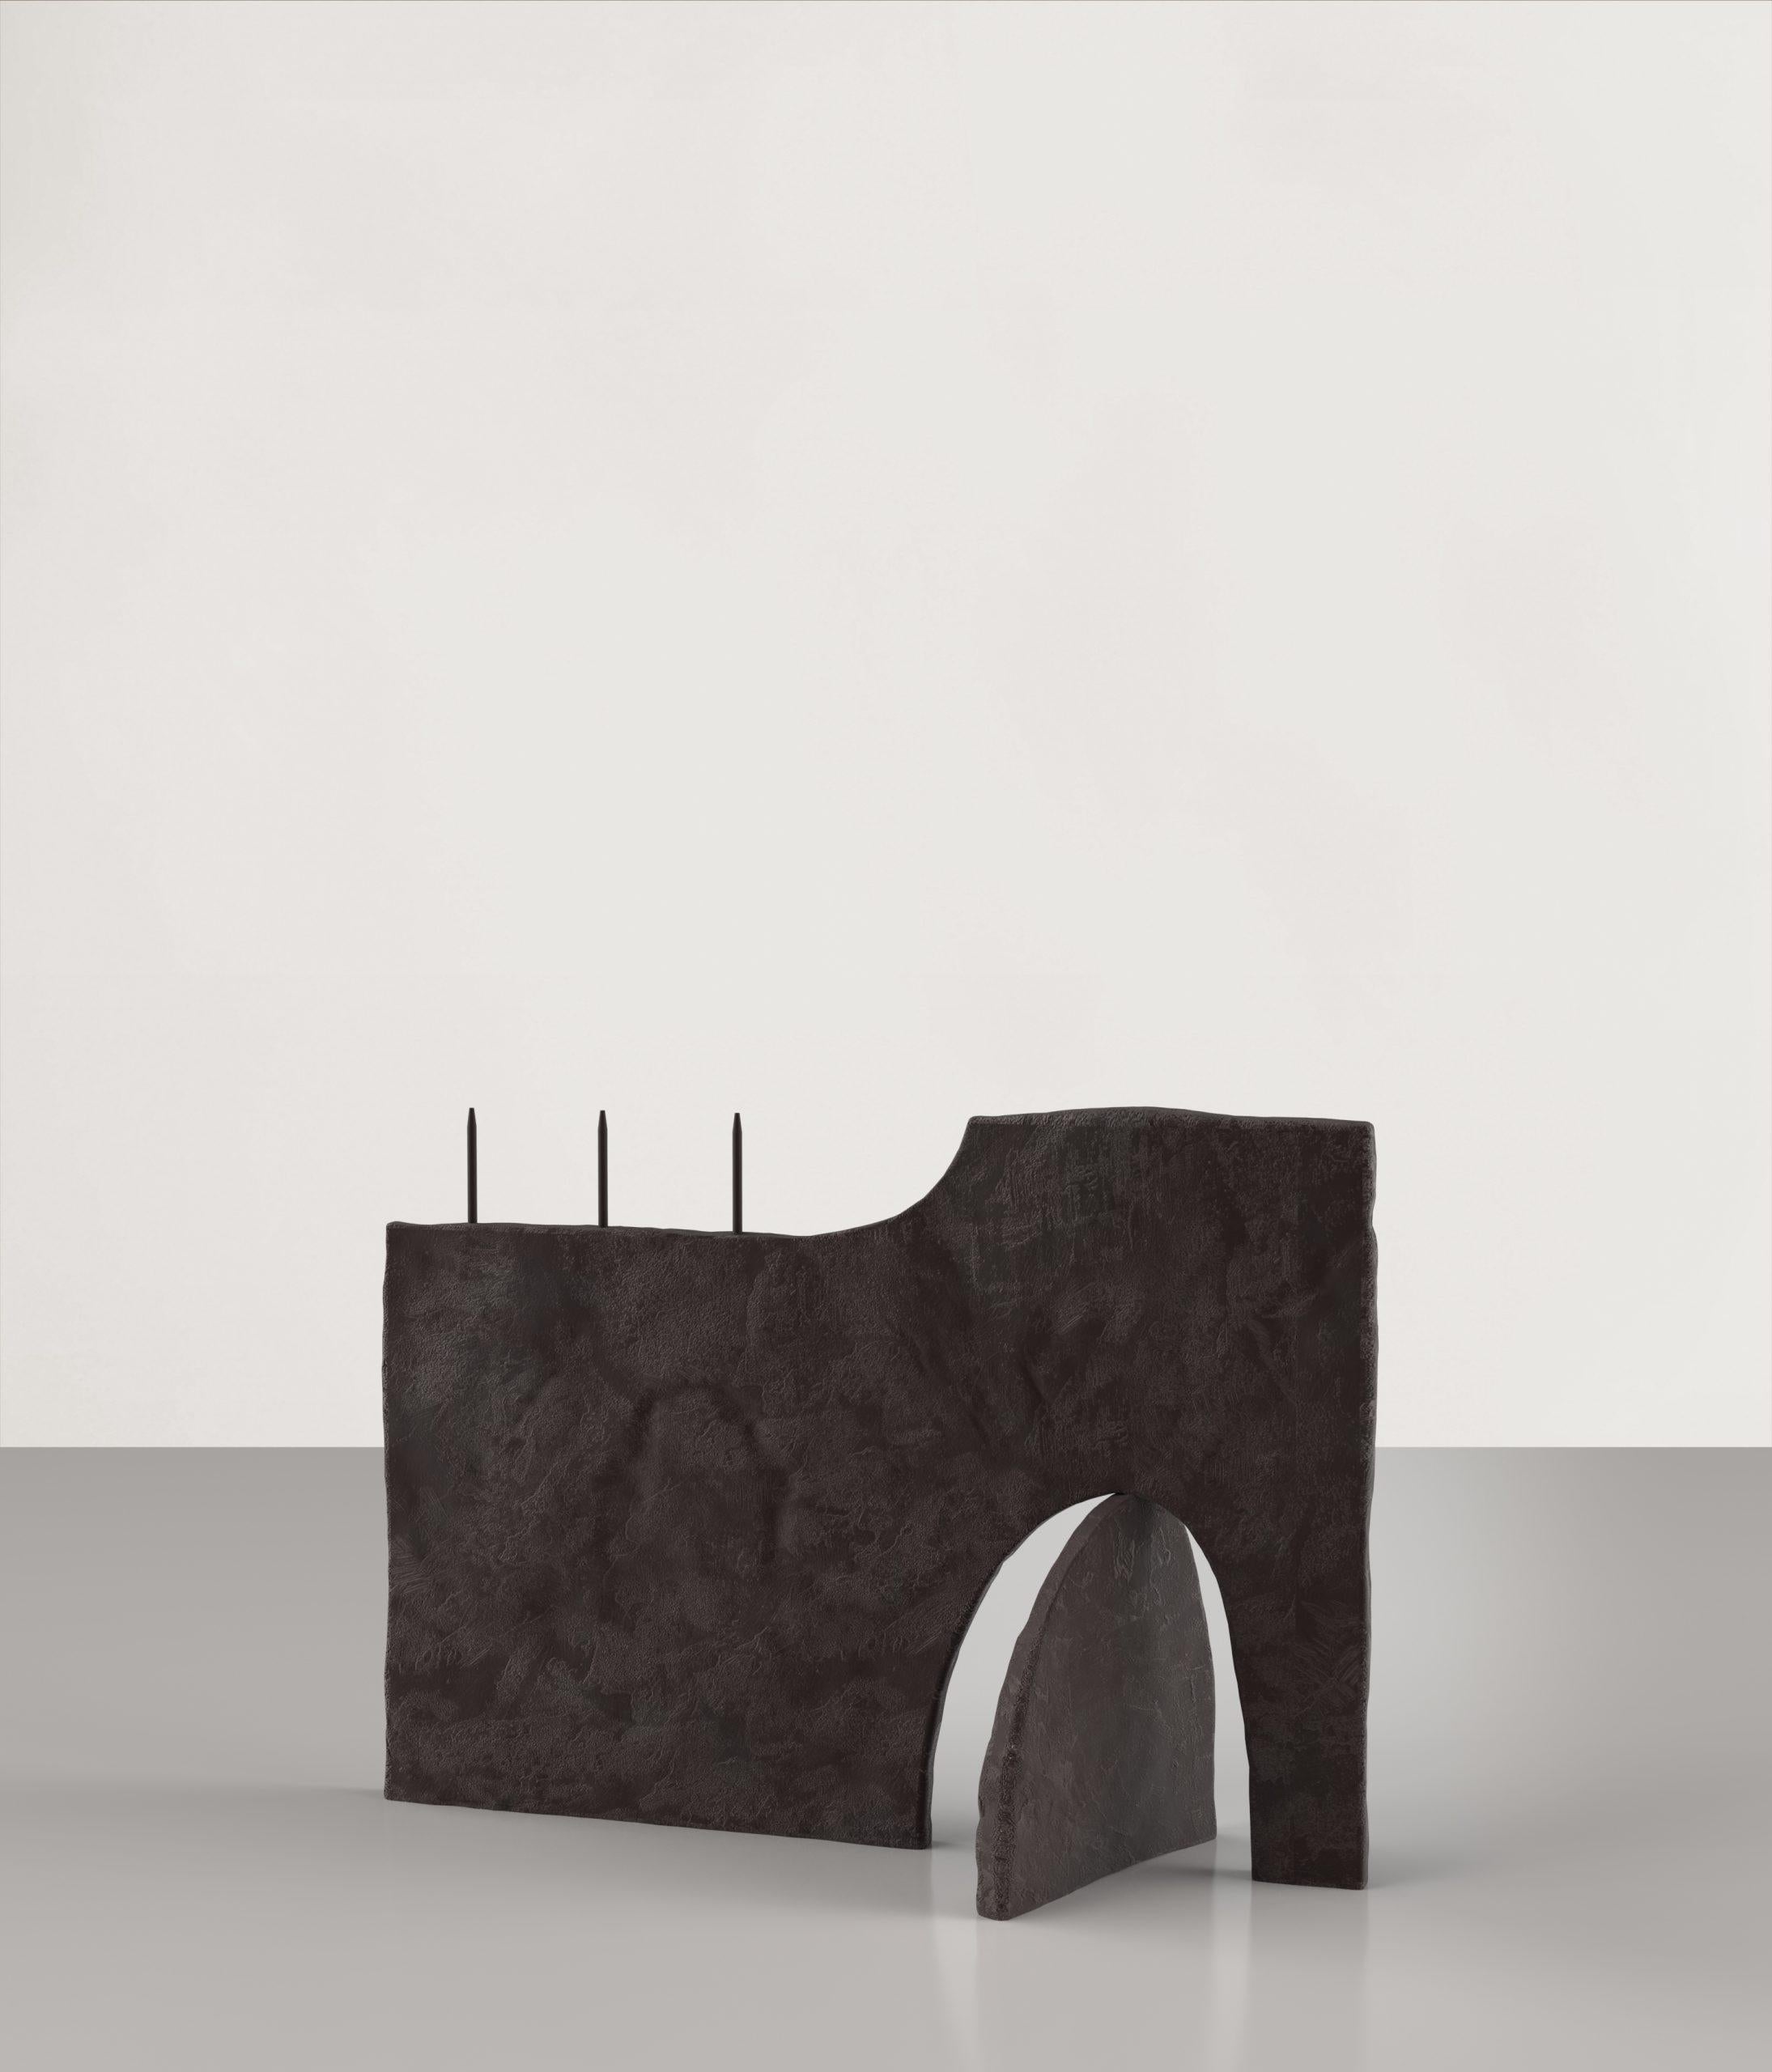 Ouble V1 candleholder by Edizione Limitata
Limited Edition of 15 + 3 pieces. Signed and numbered.
Dimensions: D 7 x W 21 x H 15 cm.
Materials: Cast Bronze.

Edizione Limitata, that is to say “Limited Edition”, is a brand promoting and